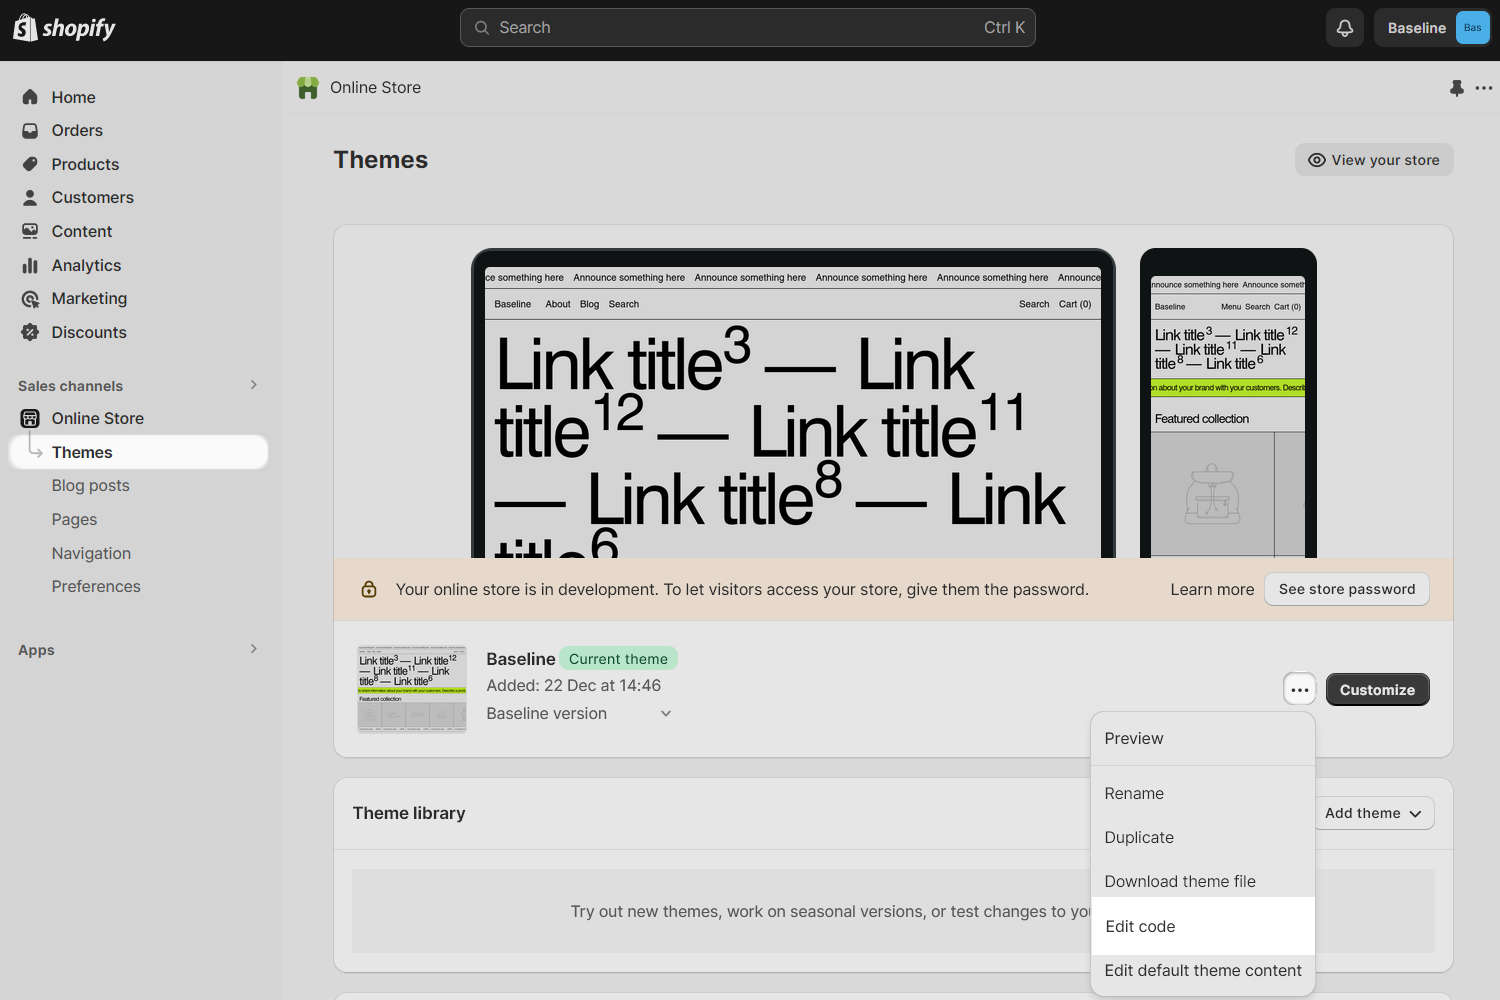 Screenshot of the Baseline theme, in the Online Store section of the Shopify Admin, with the Actions dropdown menu expanded.